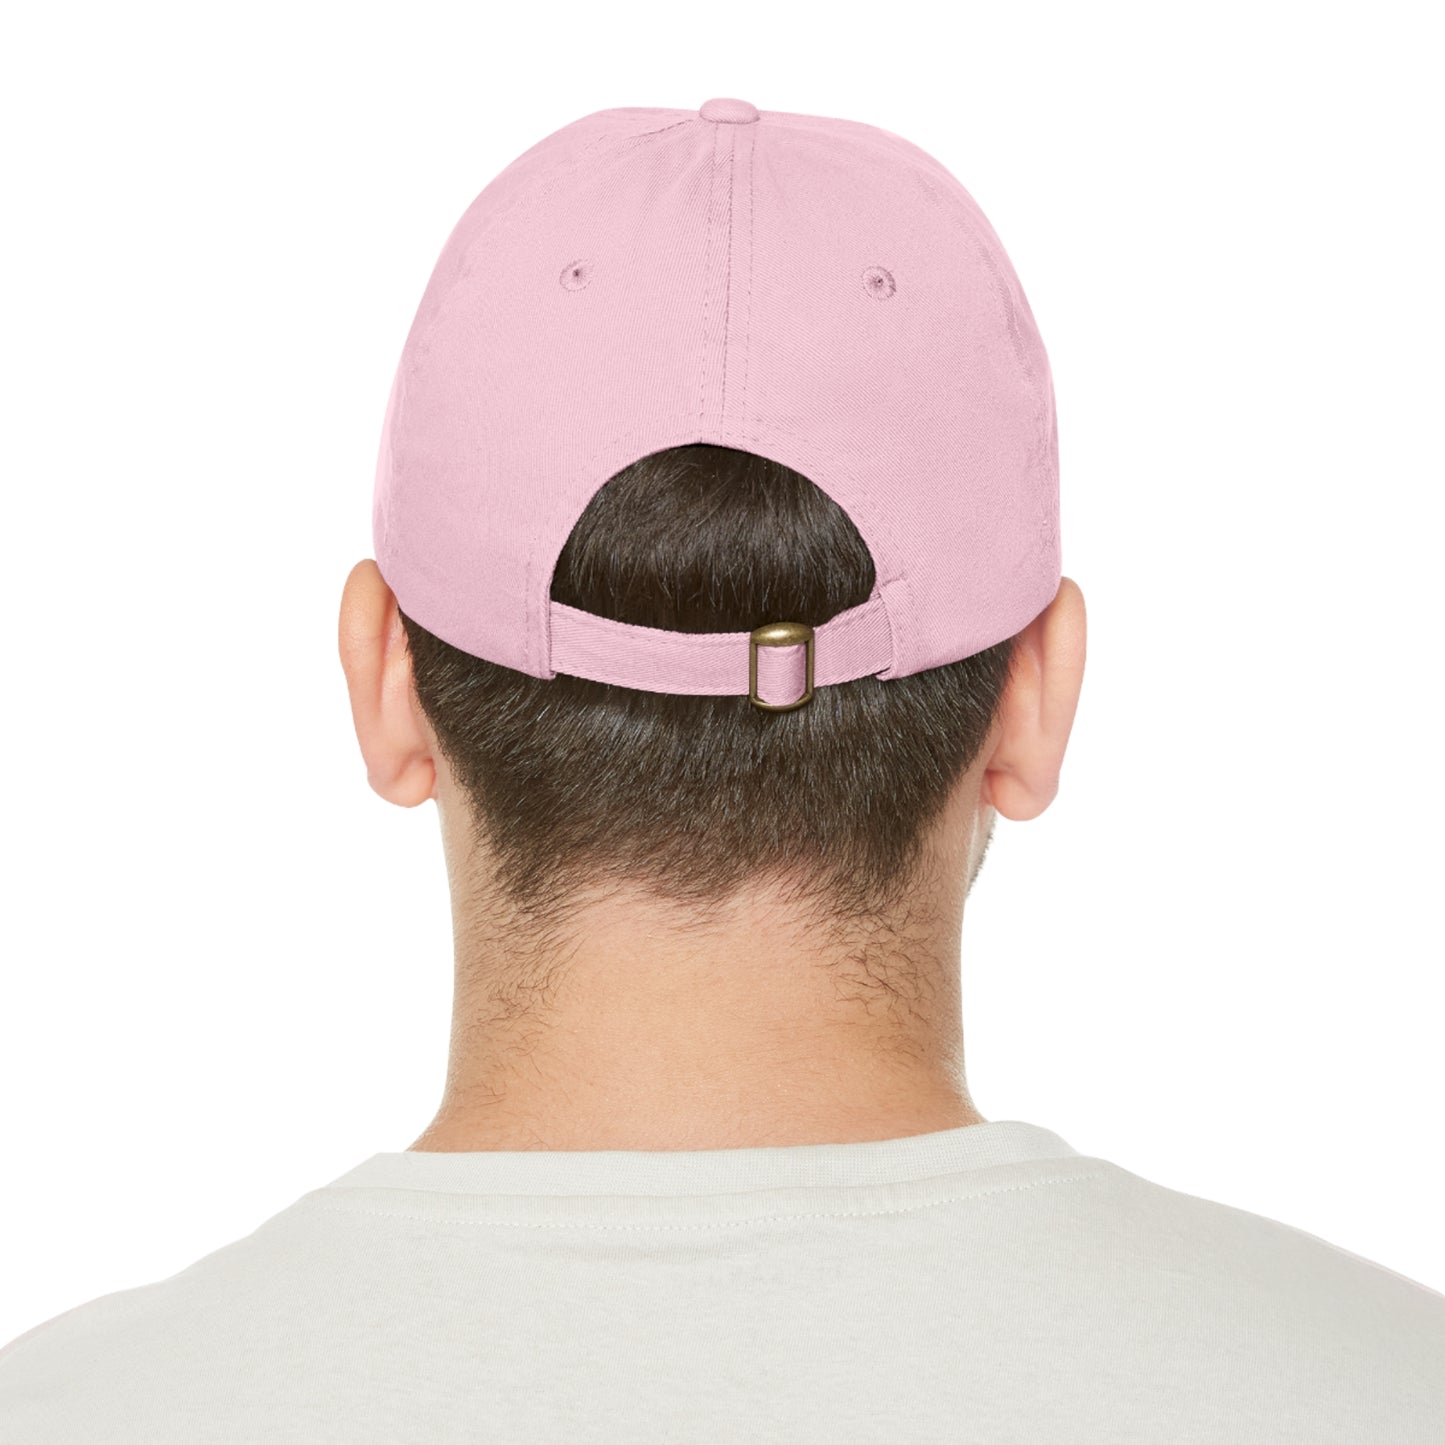 Courthouse Art Deco 2 Dad Hat